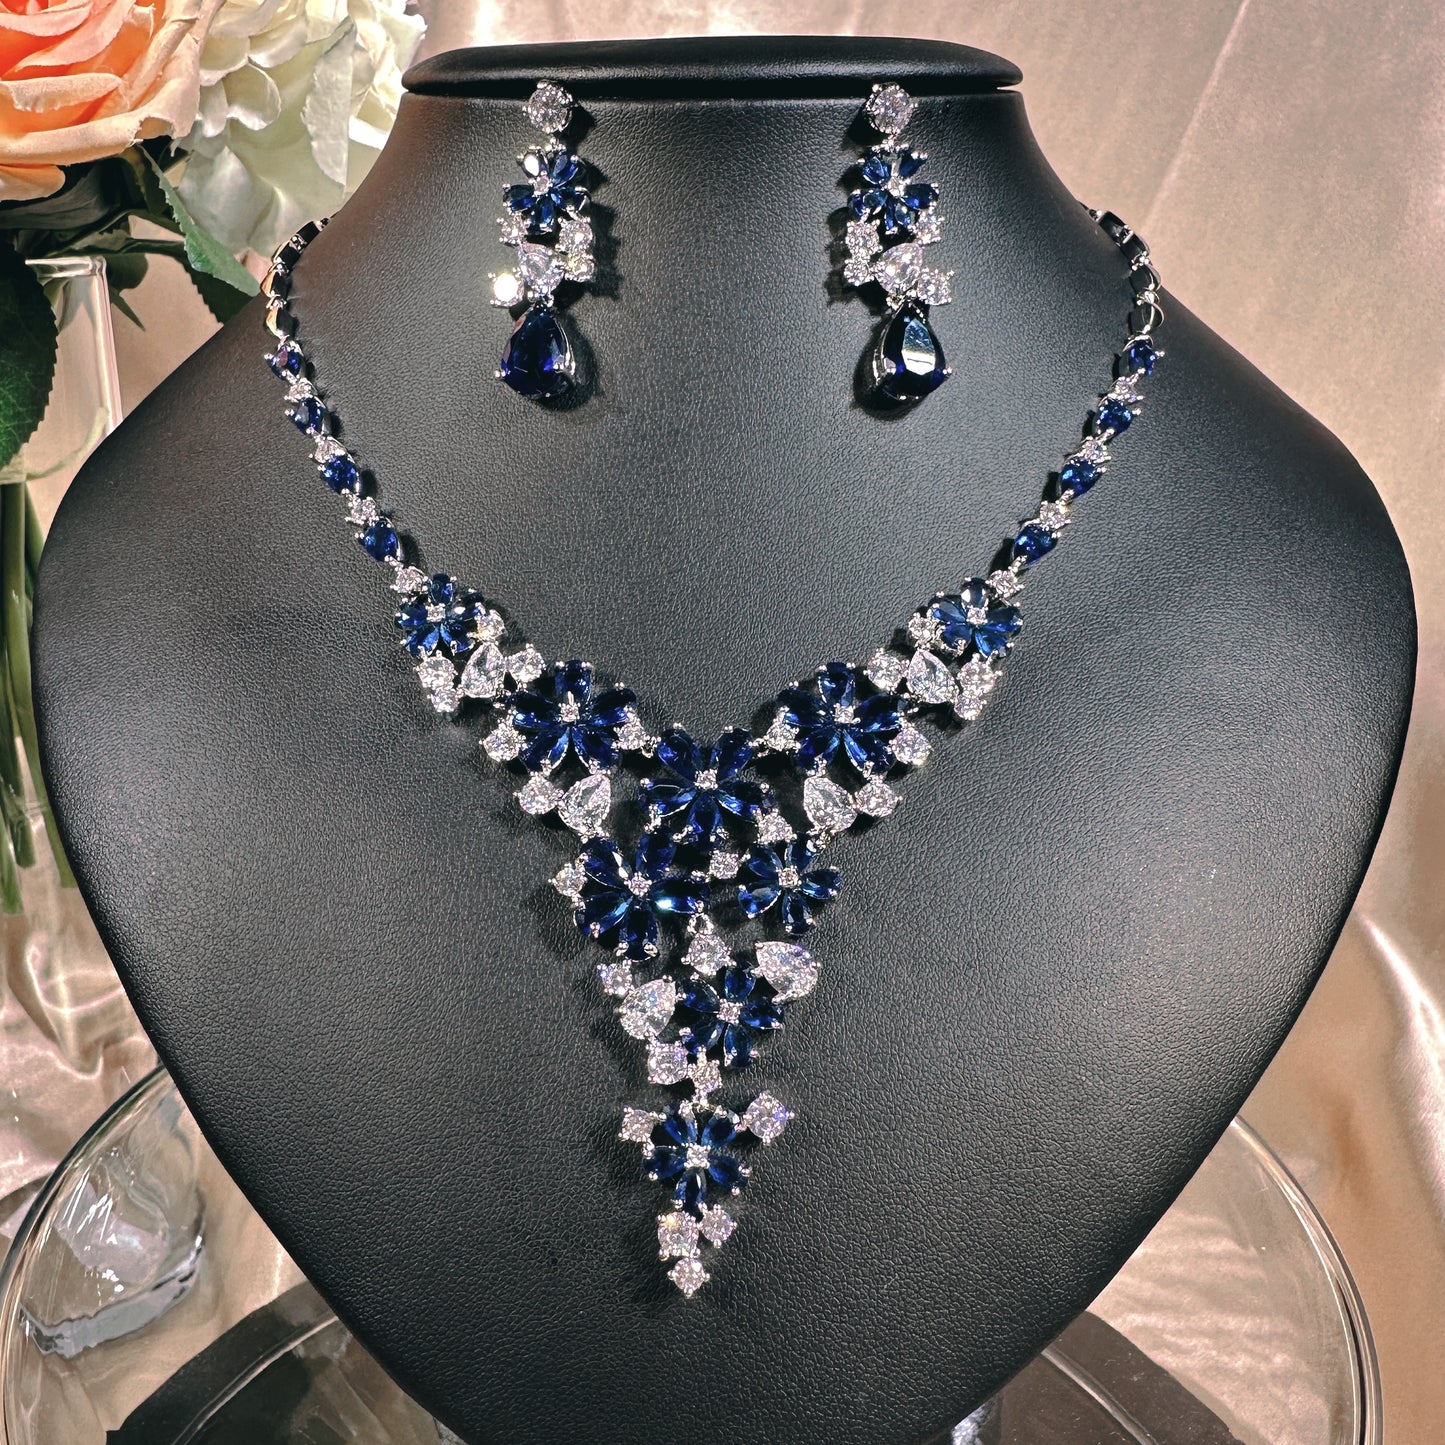 #23902006 Elegant and Glamorous Bib Style Jewelry Set - Available in 3 Stunning Colors (Silver, Green, & Blue)